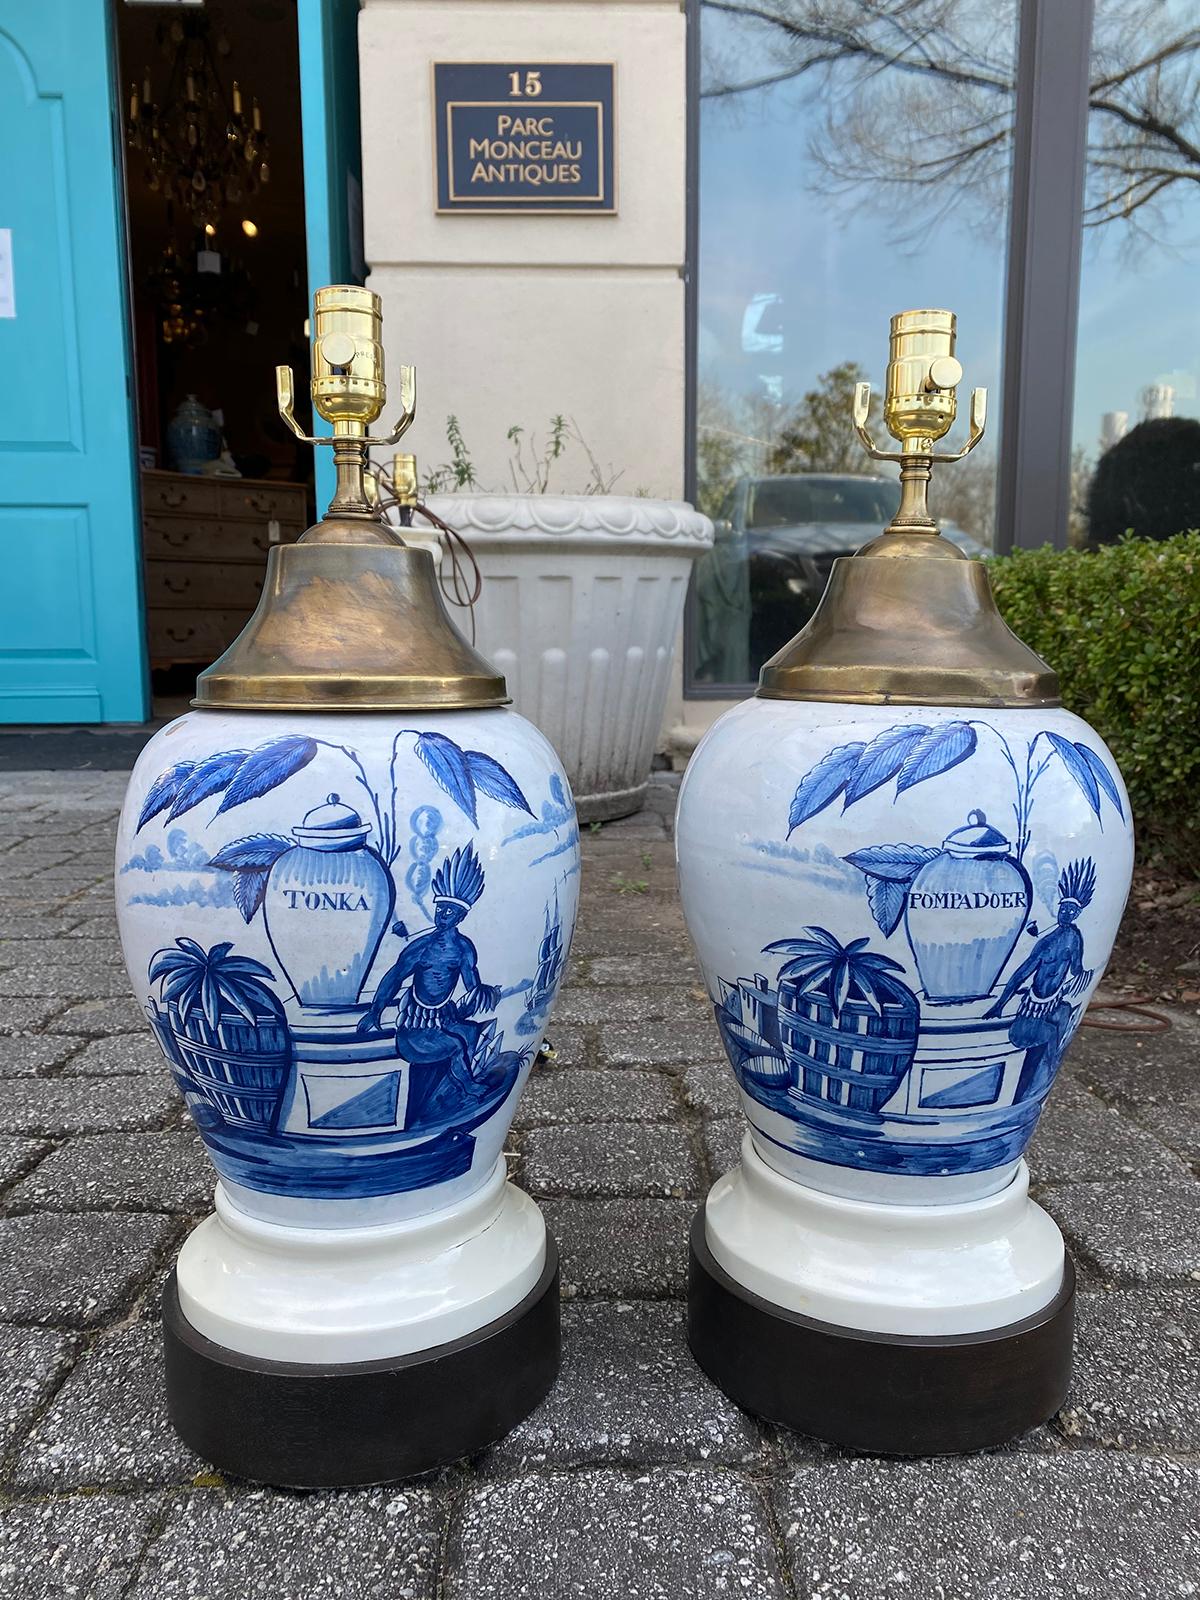 Pair of 18th Century delft tobacco jars as lamps
New wiring.